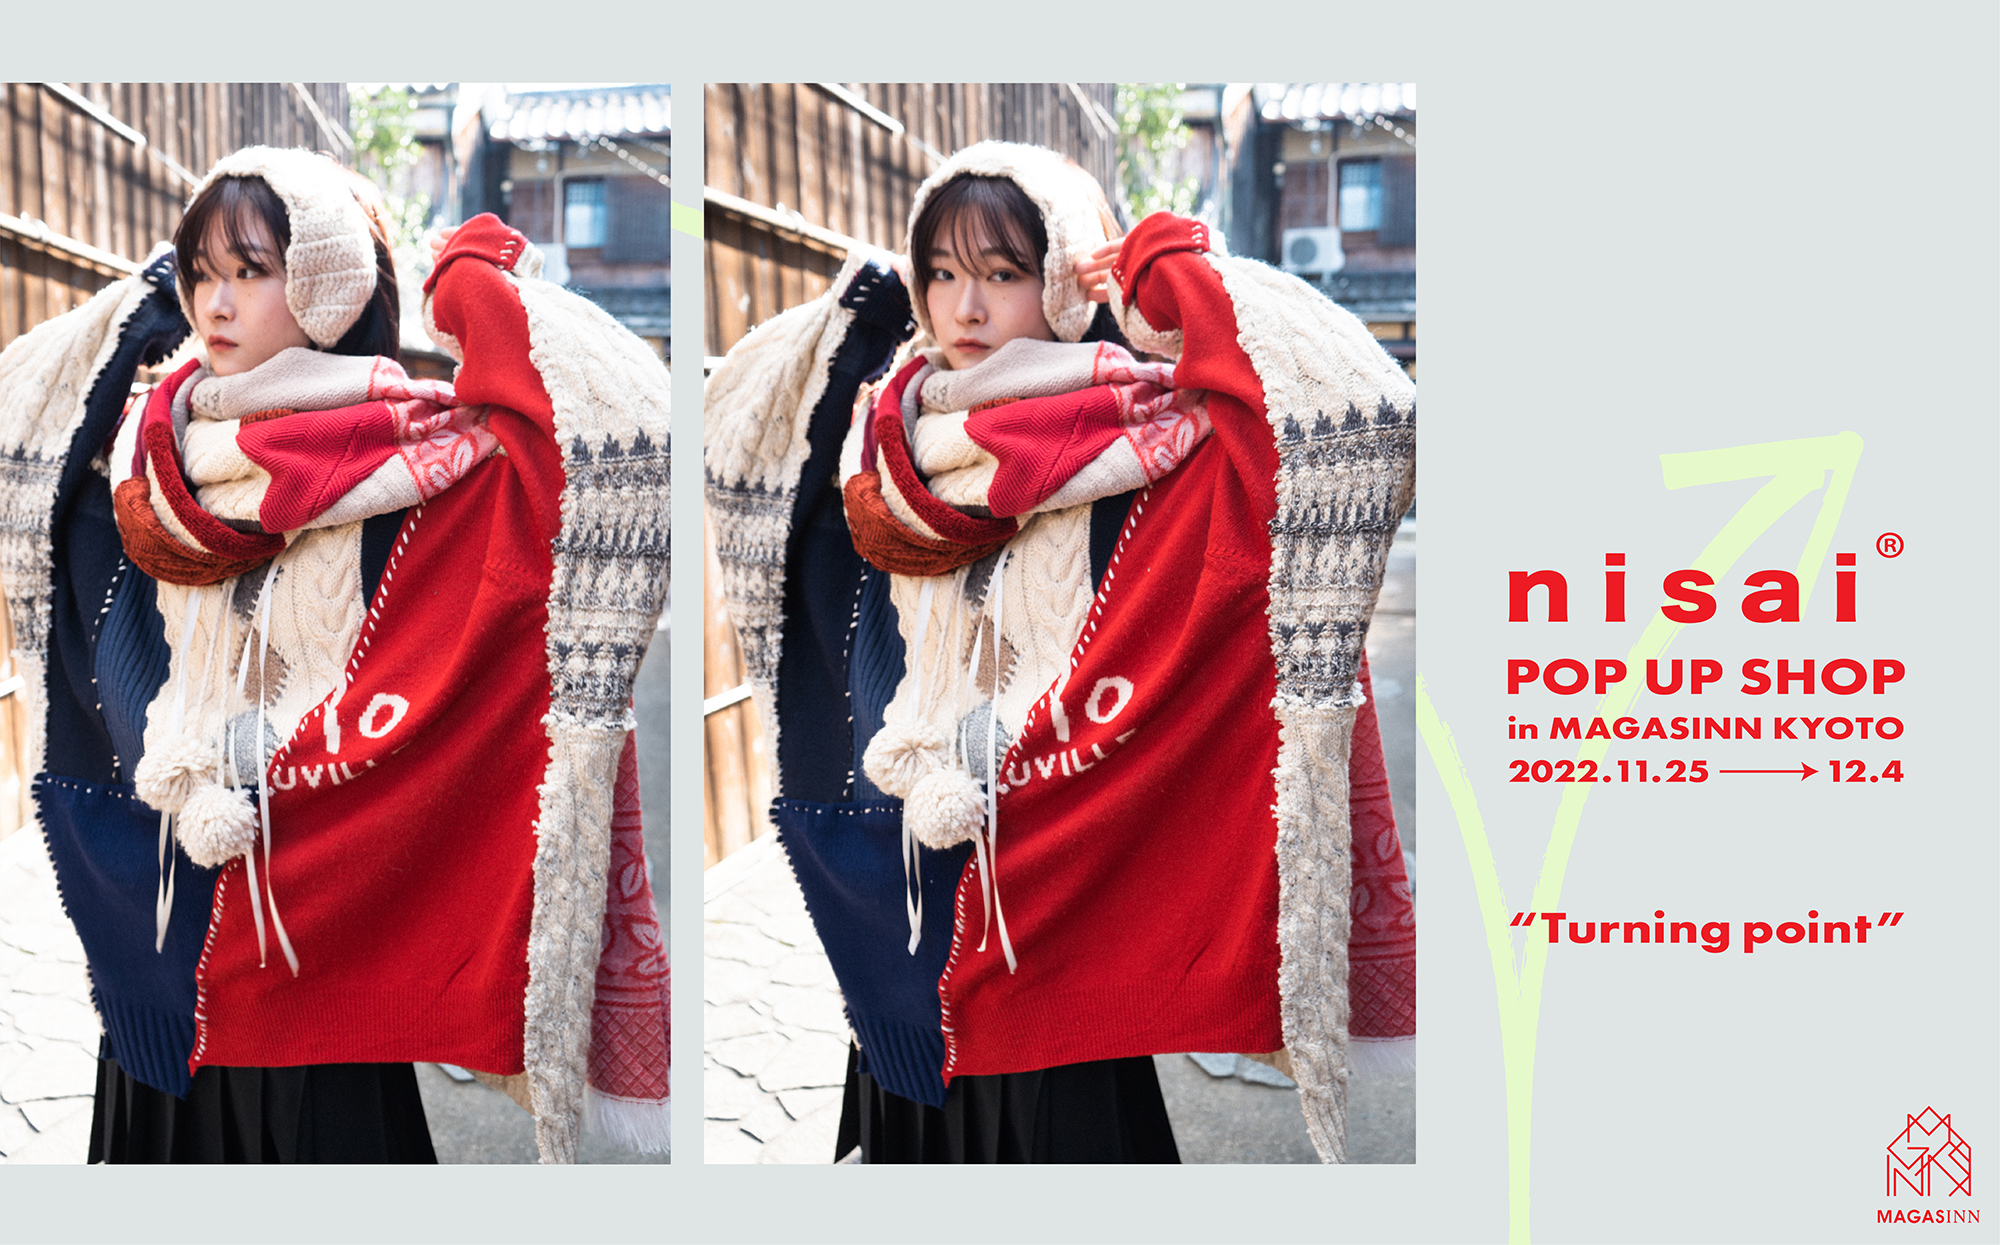 nisai POPUP「Turning Point」を開催します。